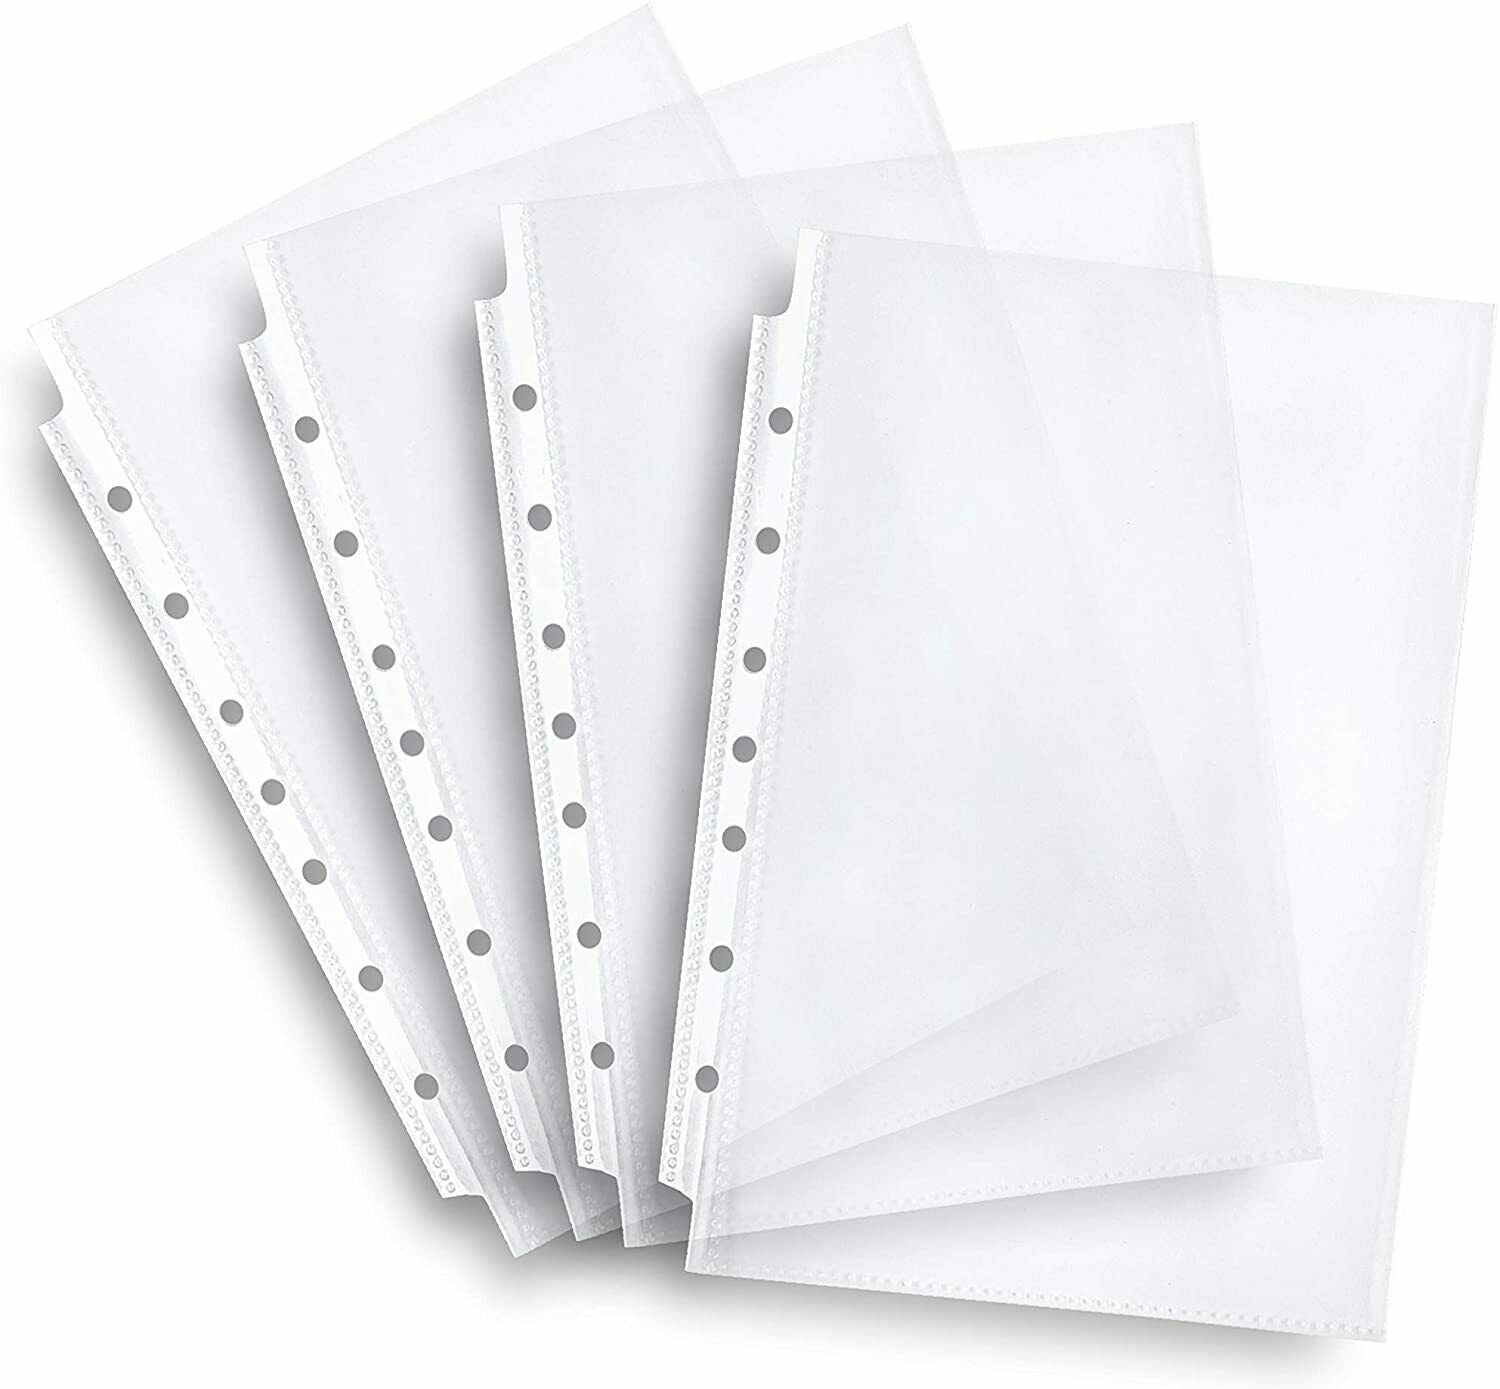 Oxford® Heavyweight Sheet Protectors, 11 x 17, Clear Finish, Reinforced 7  hole Punch, 10 per Pack